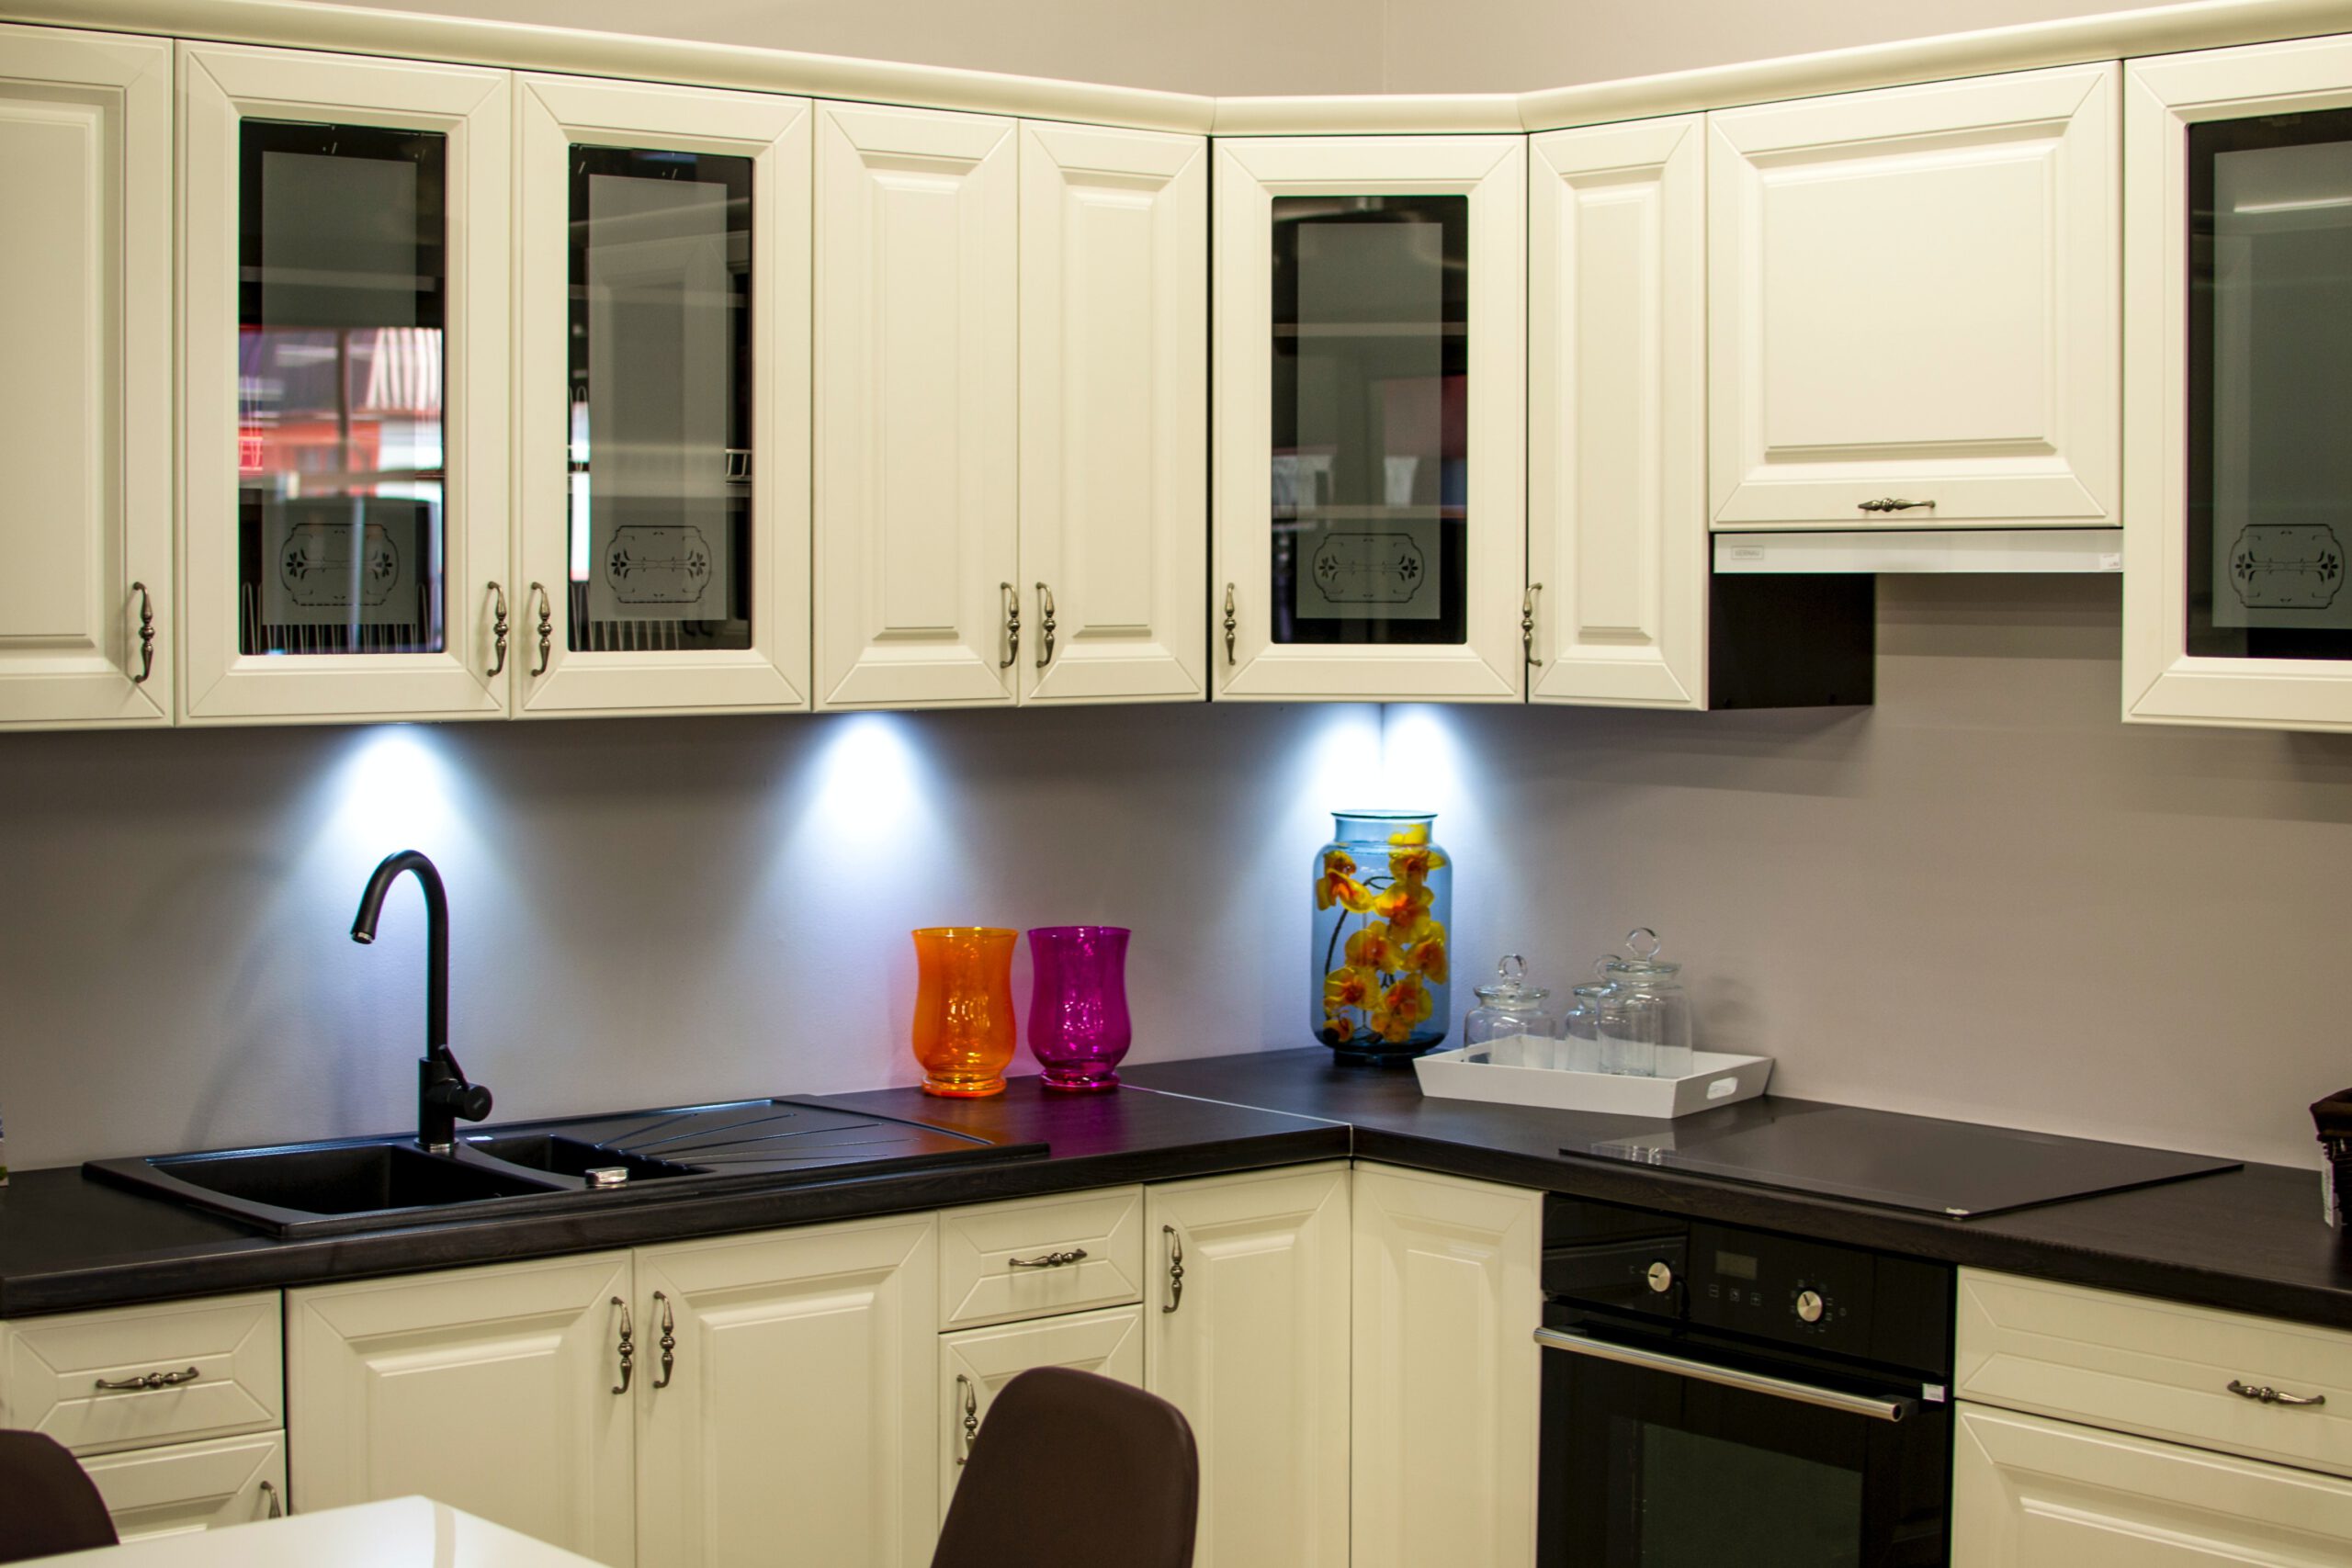 black countertops and white/cream cabinets on the cabinets